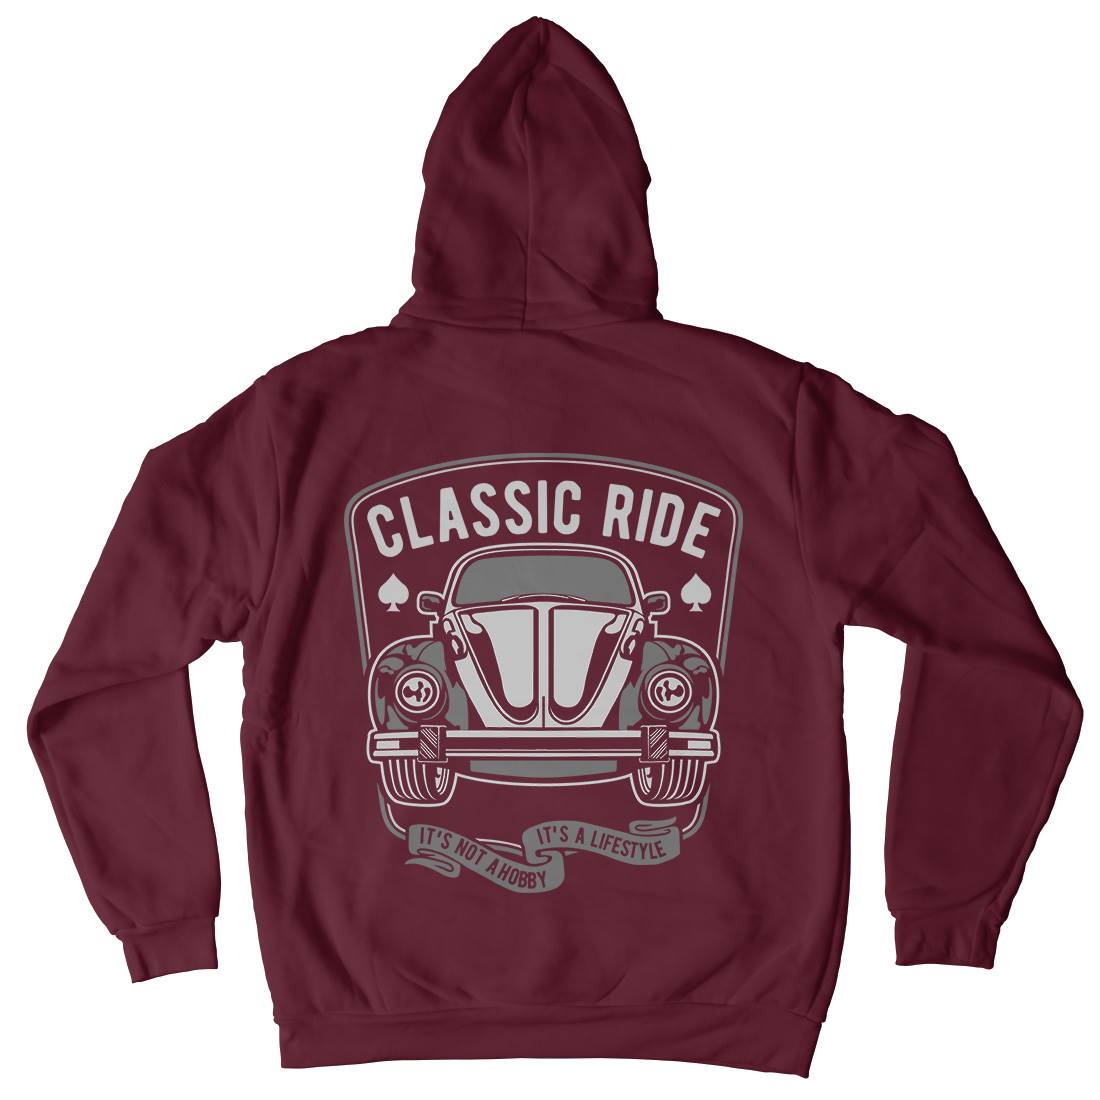 Classic Ride Mens Hoodie With Pocket Cars B195